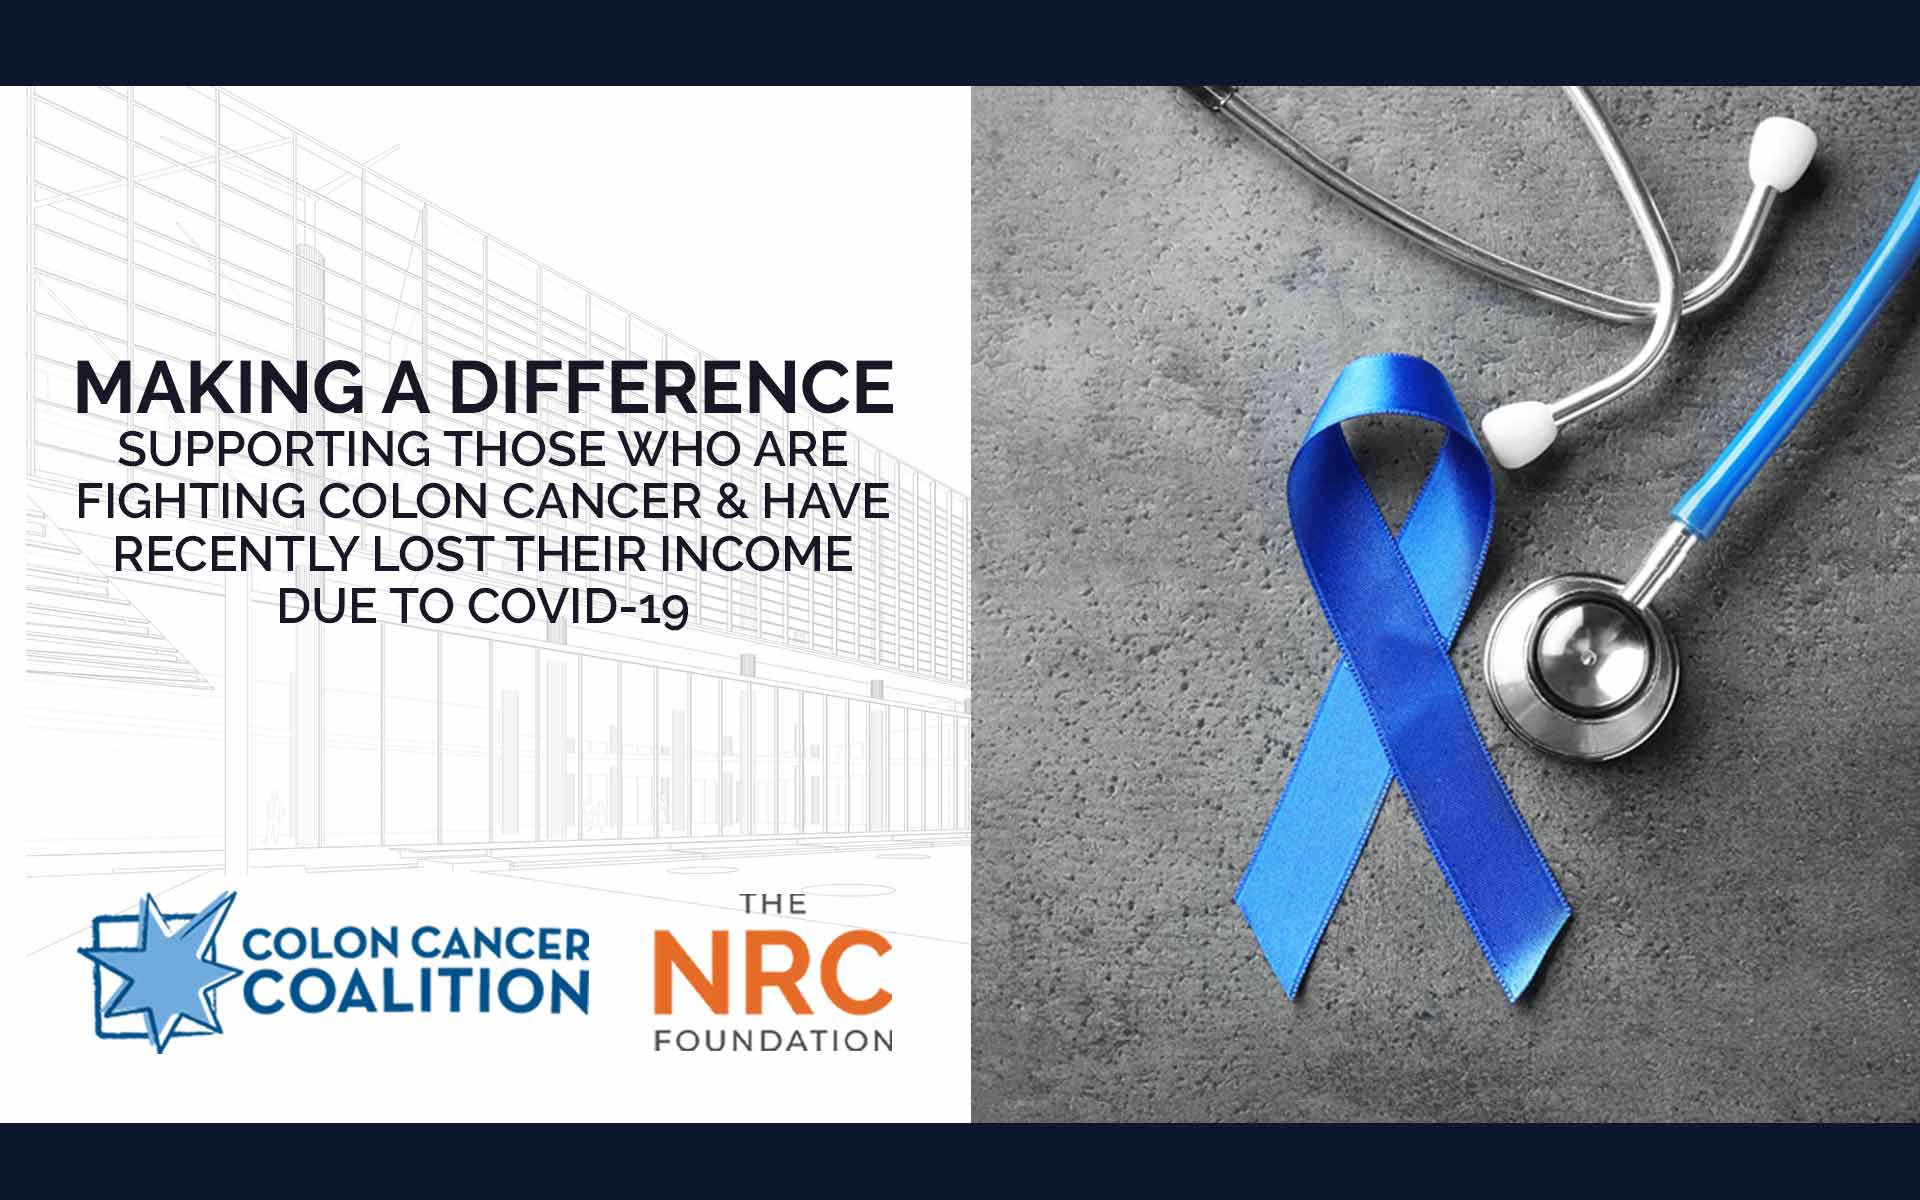 The NRC Foundation Donated To The Colon Cancer Coalition